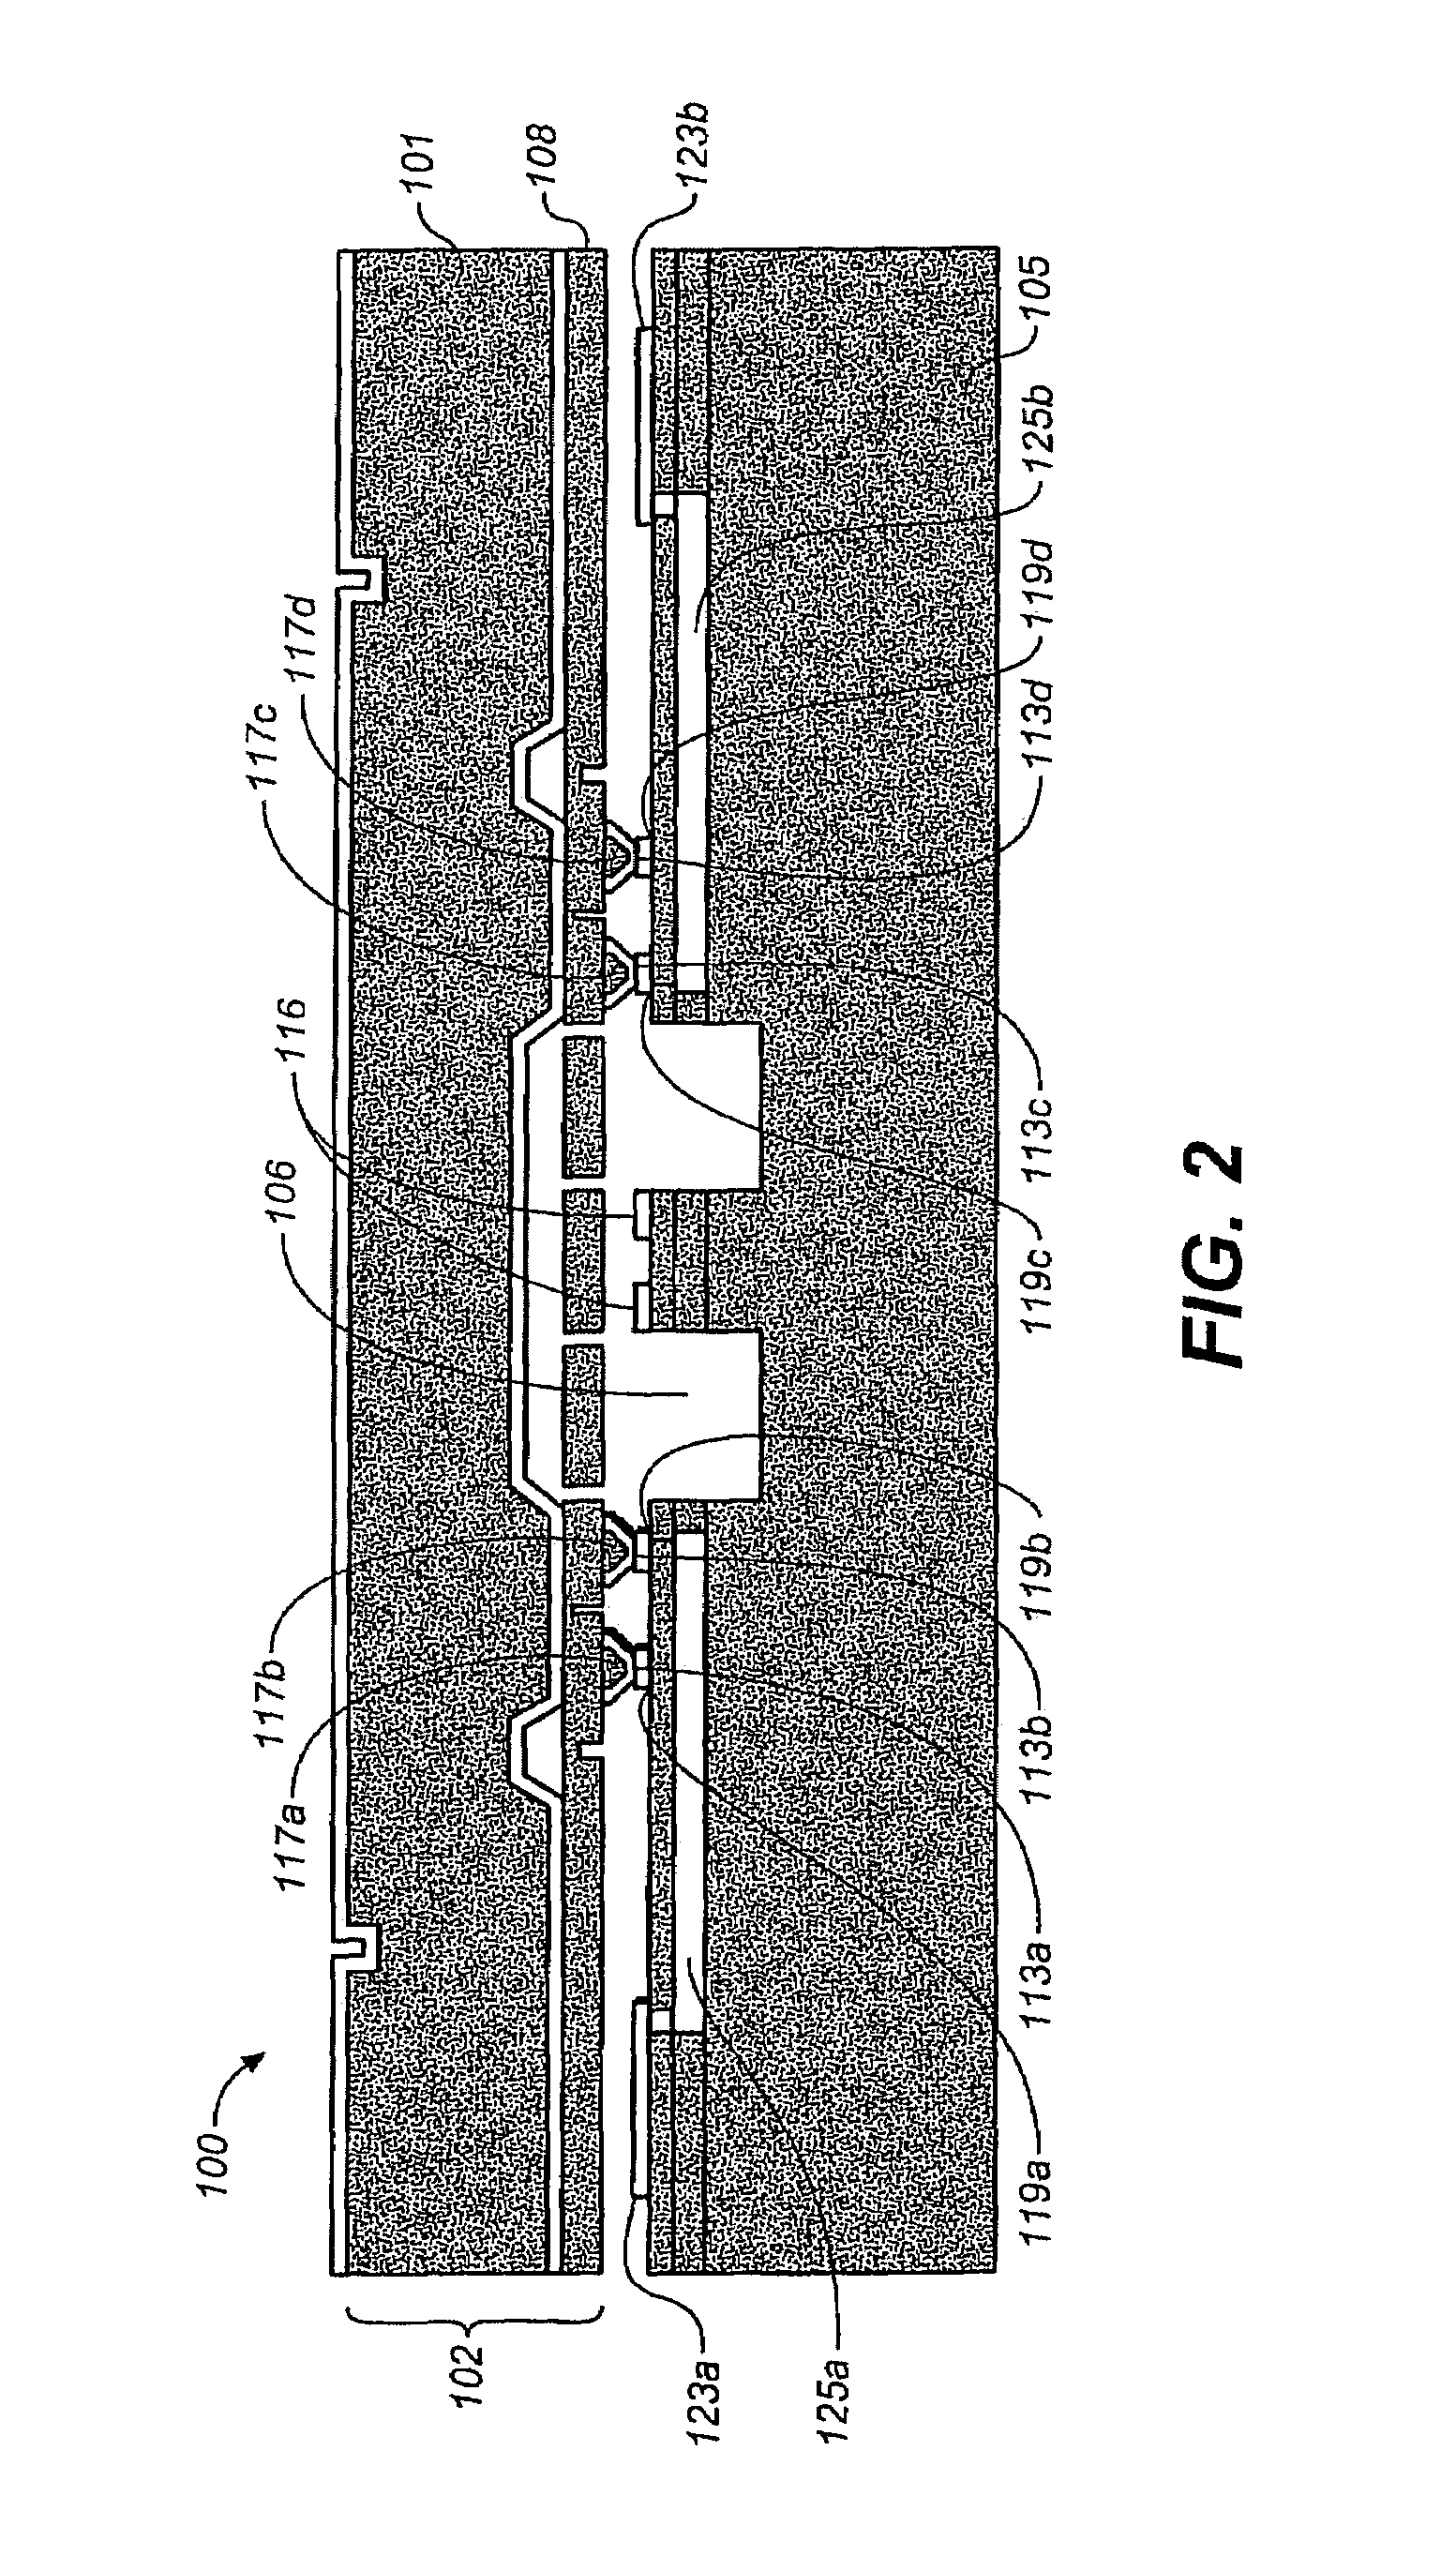 Method of fabrication of a AL/GE bonding in a wafer packaging environment and a product produced therefrom